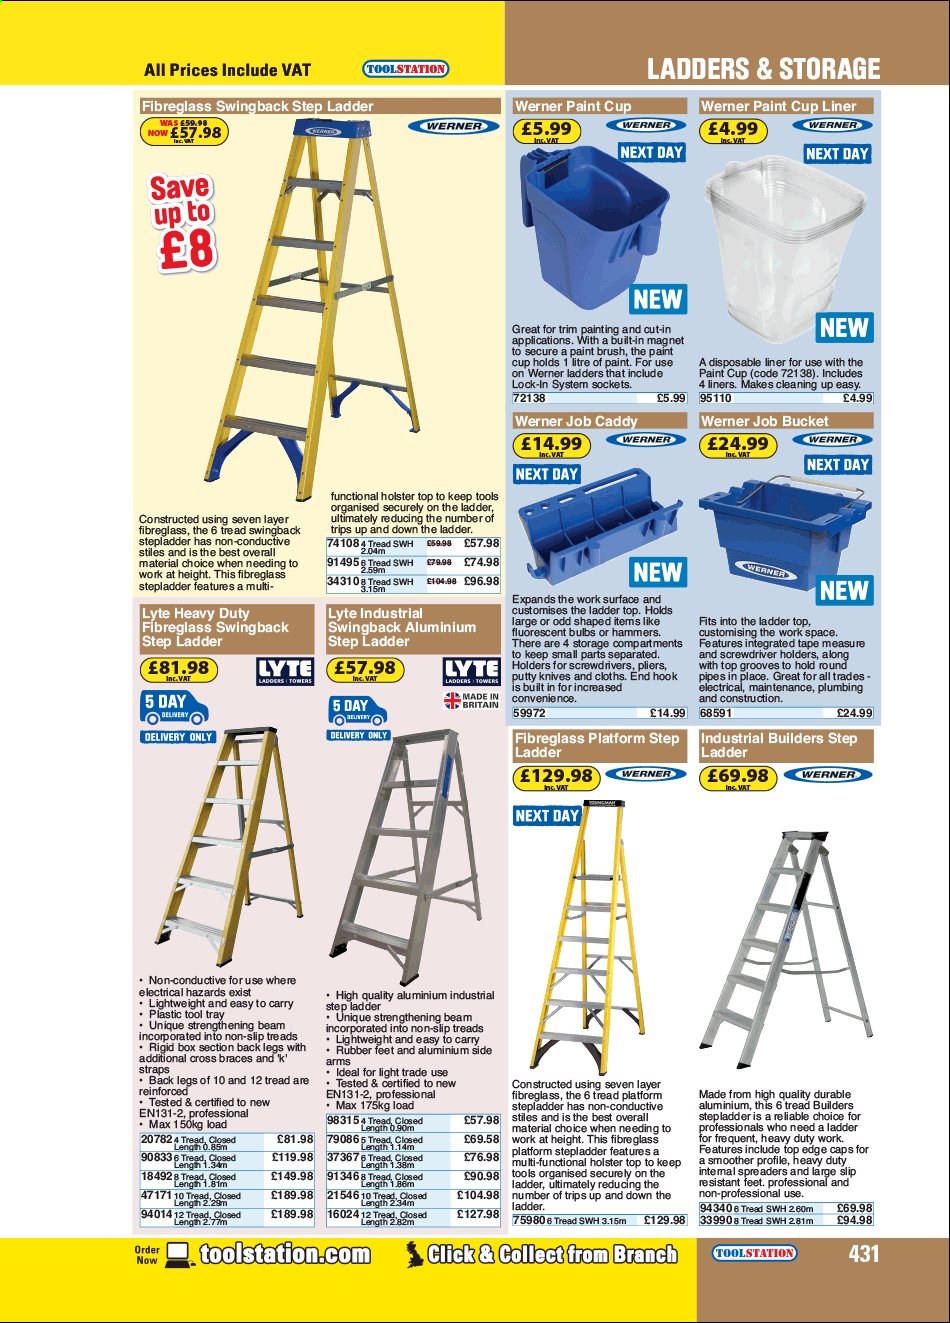 thumbnail - Toolstation offer  - Sales products - ladder, stepladder, tray, hook, screwdriver, pliers, measuring tape. Page 431.